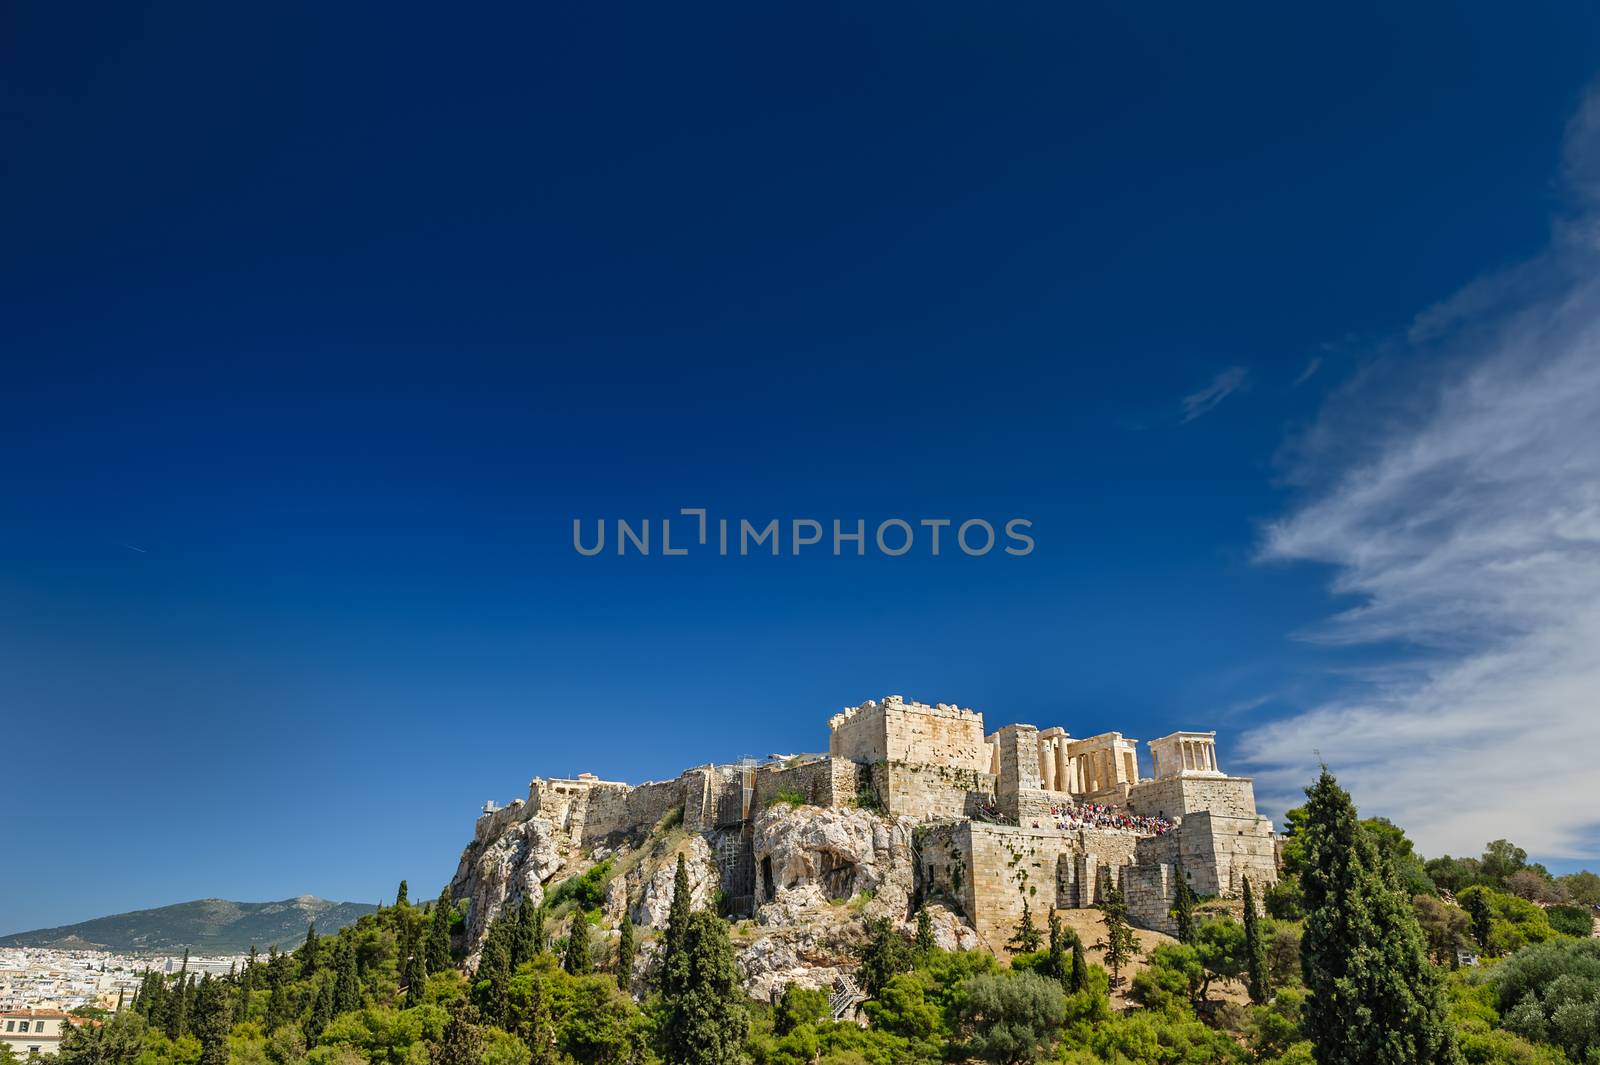 Ancient Acropolis during daytime. Athens Greece. Lot of copyspace.